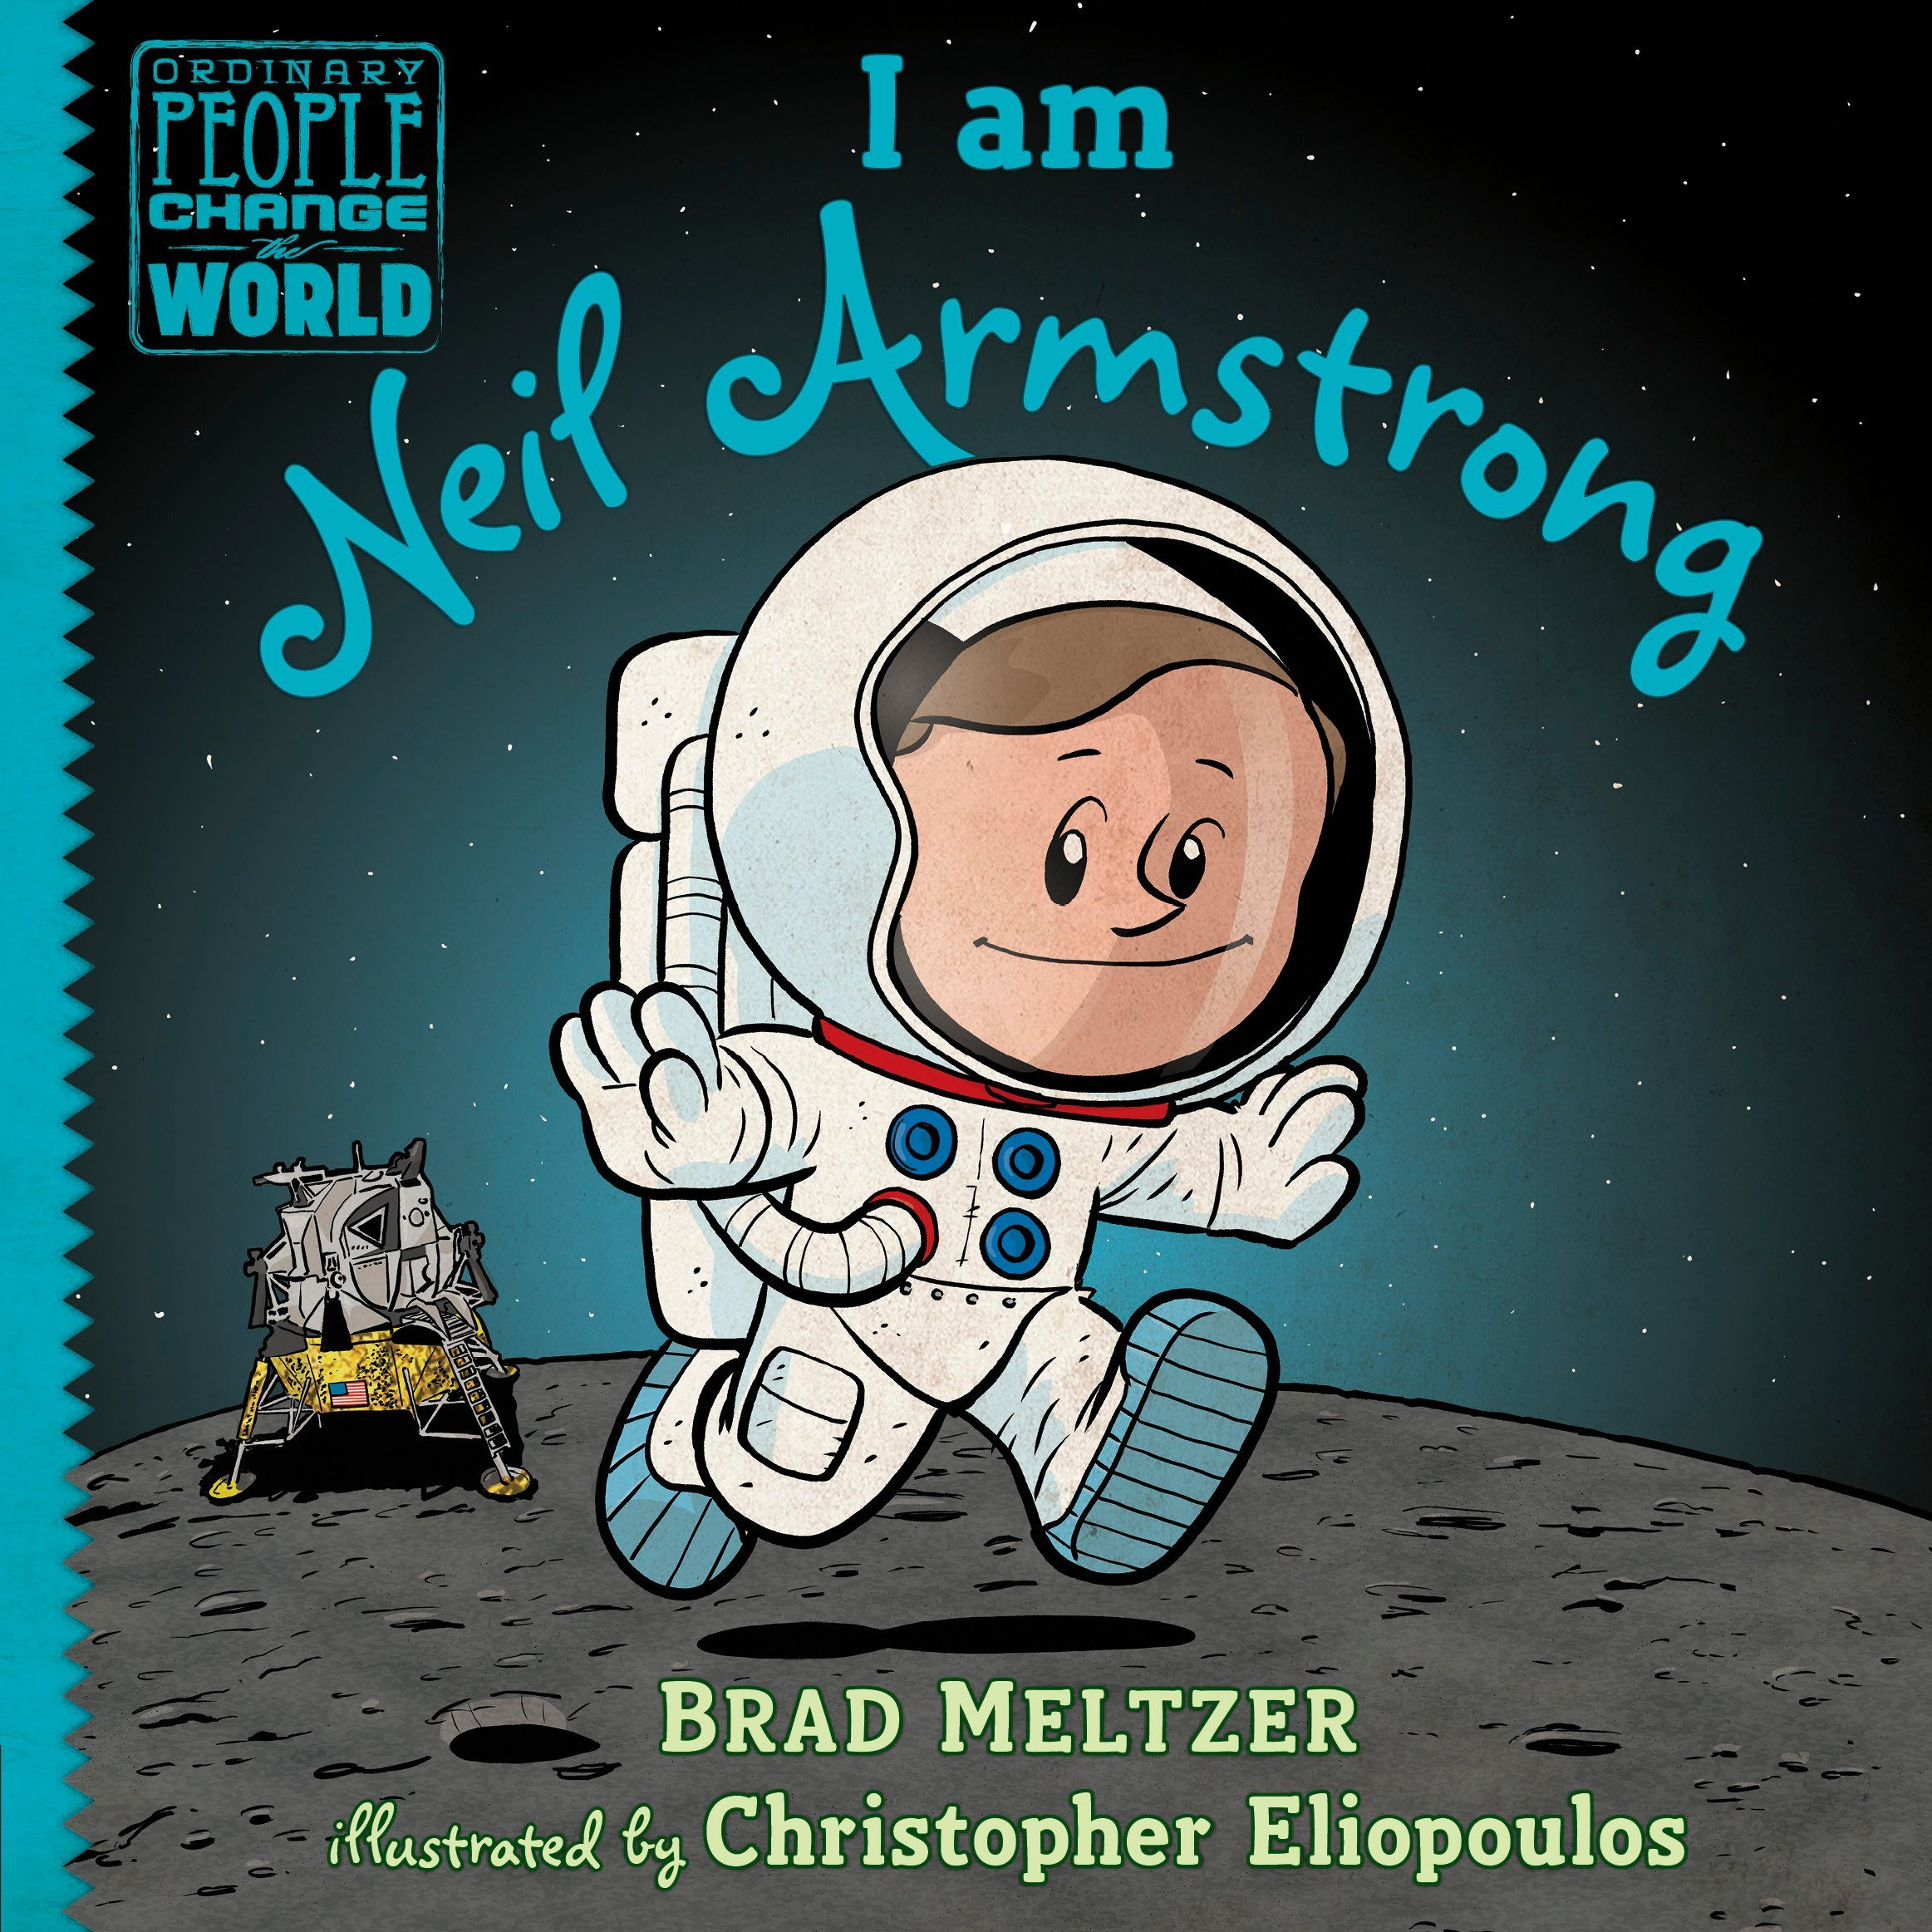 Wednesday, September 12th with guest: Brad Meltzer